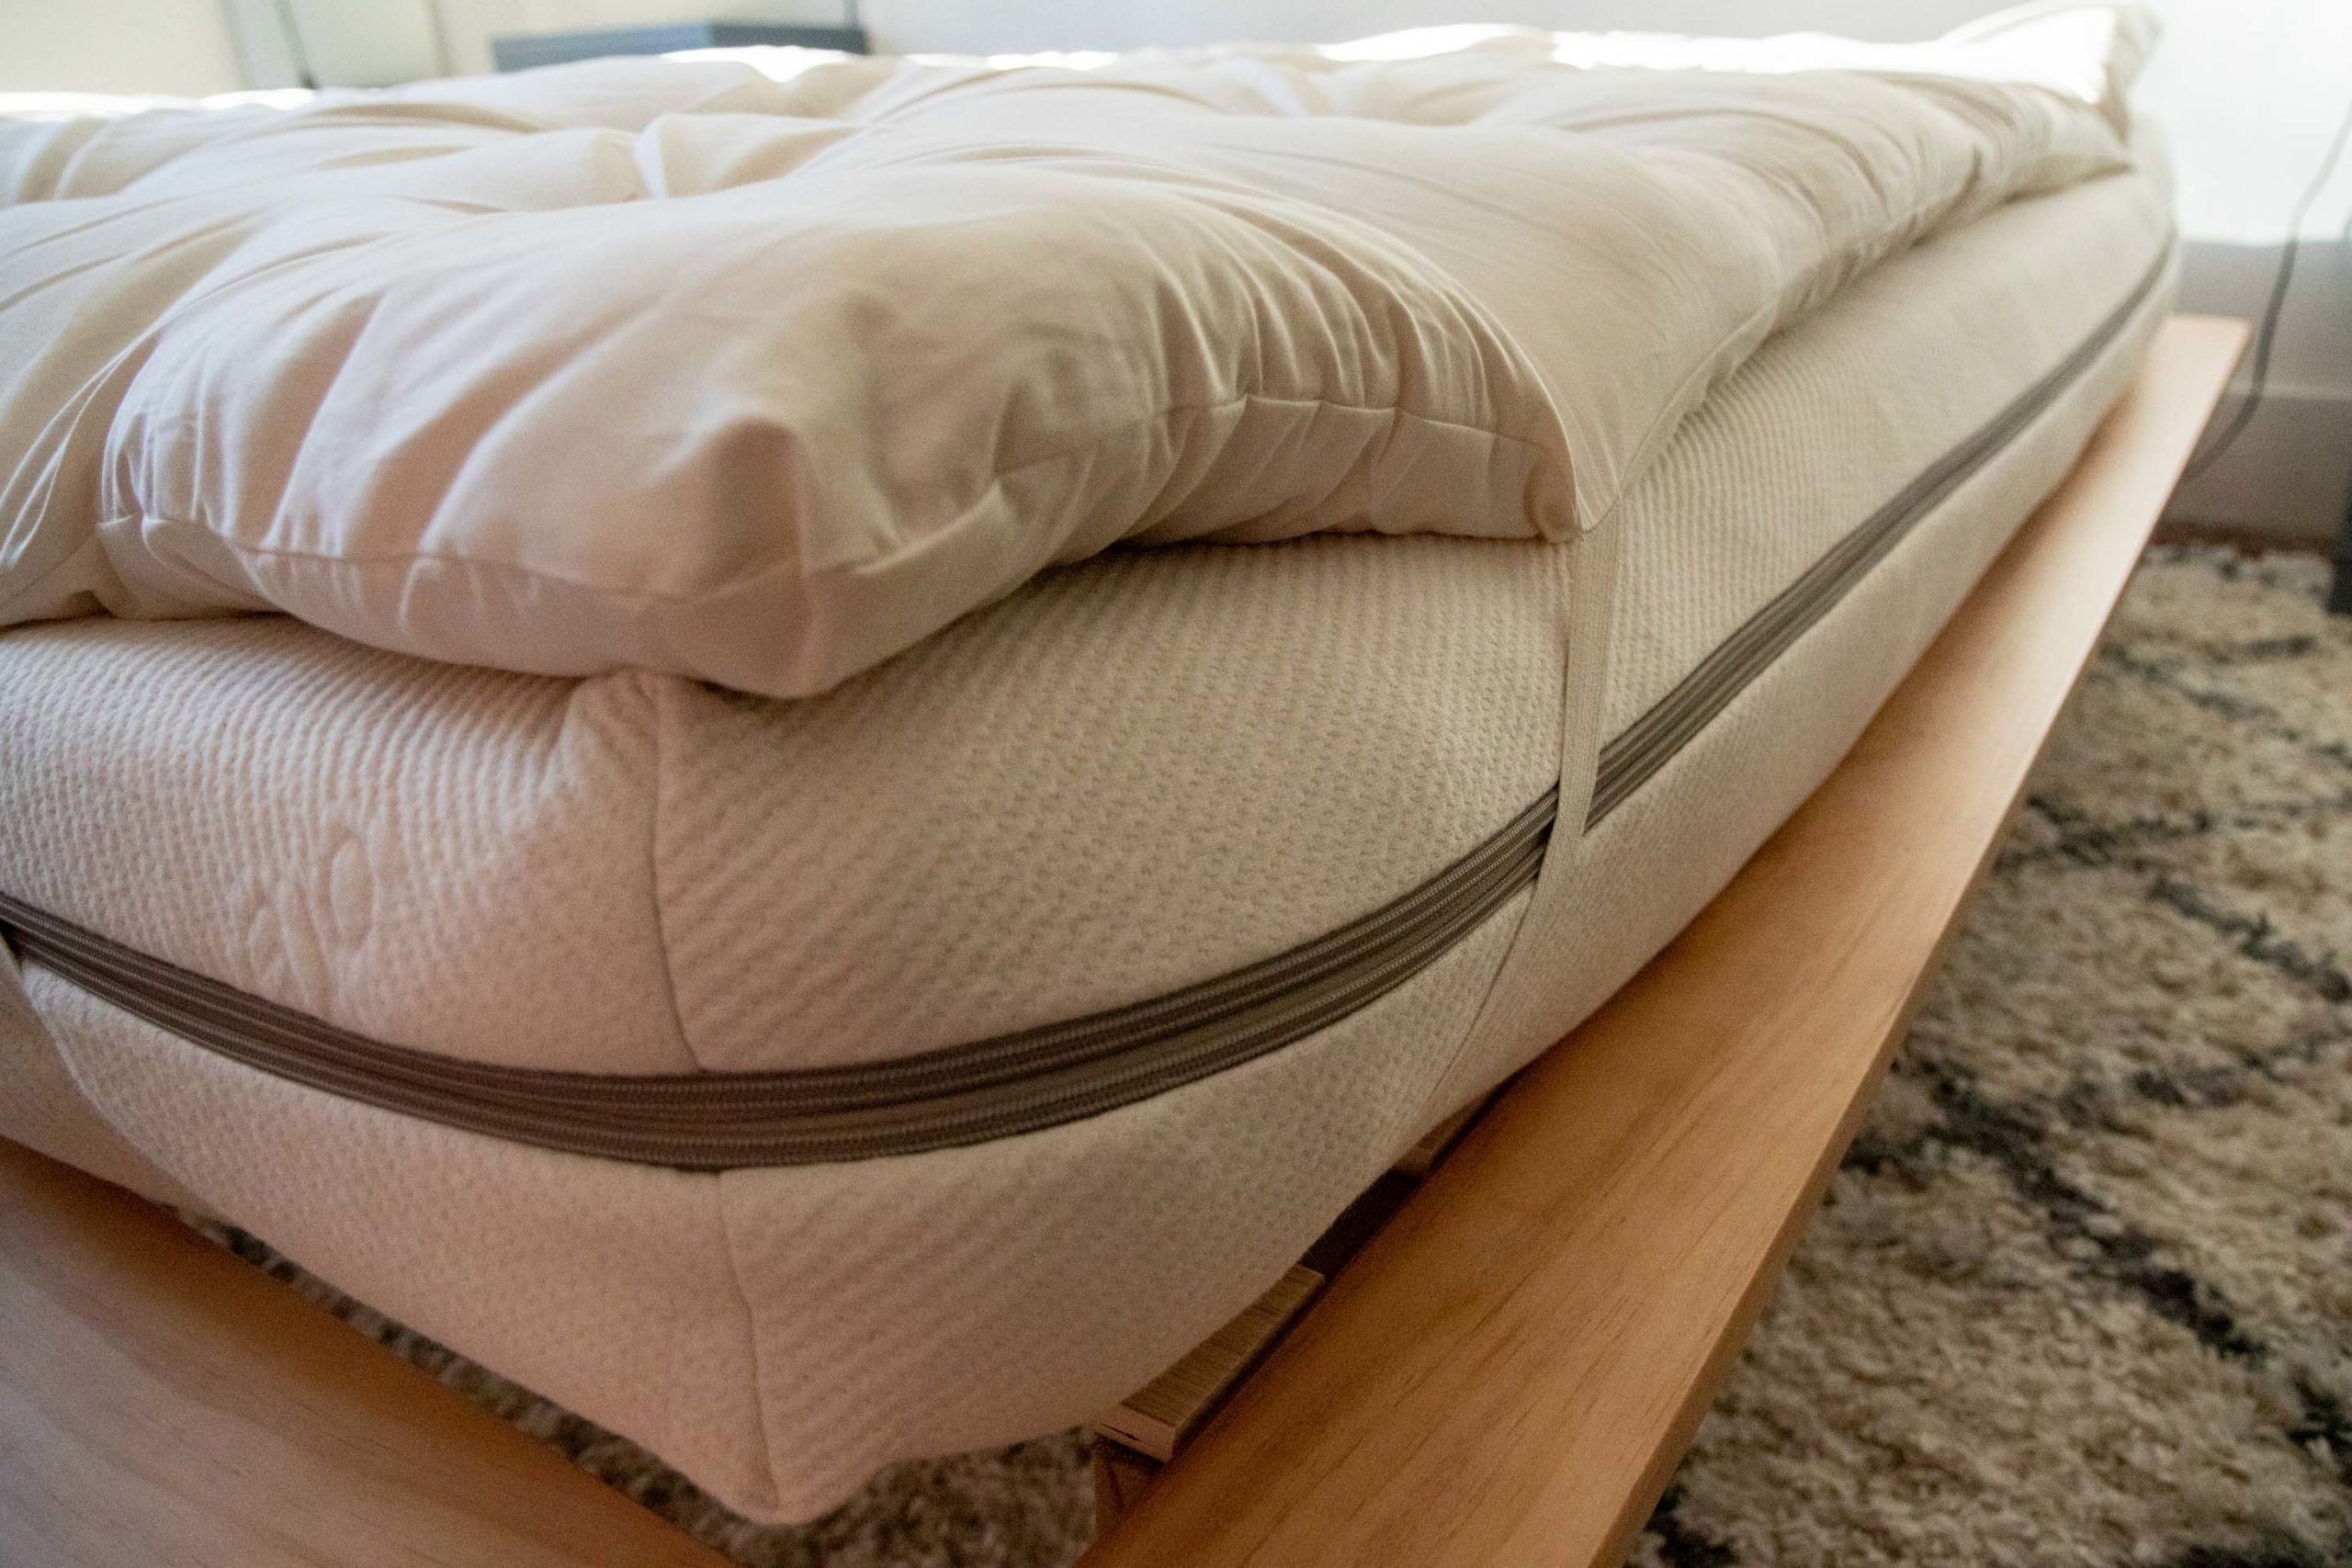 diy mattress pad cover so easy being green